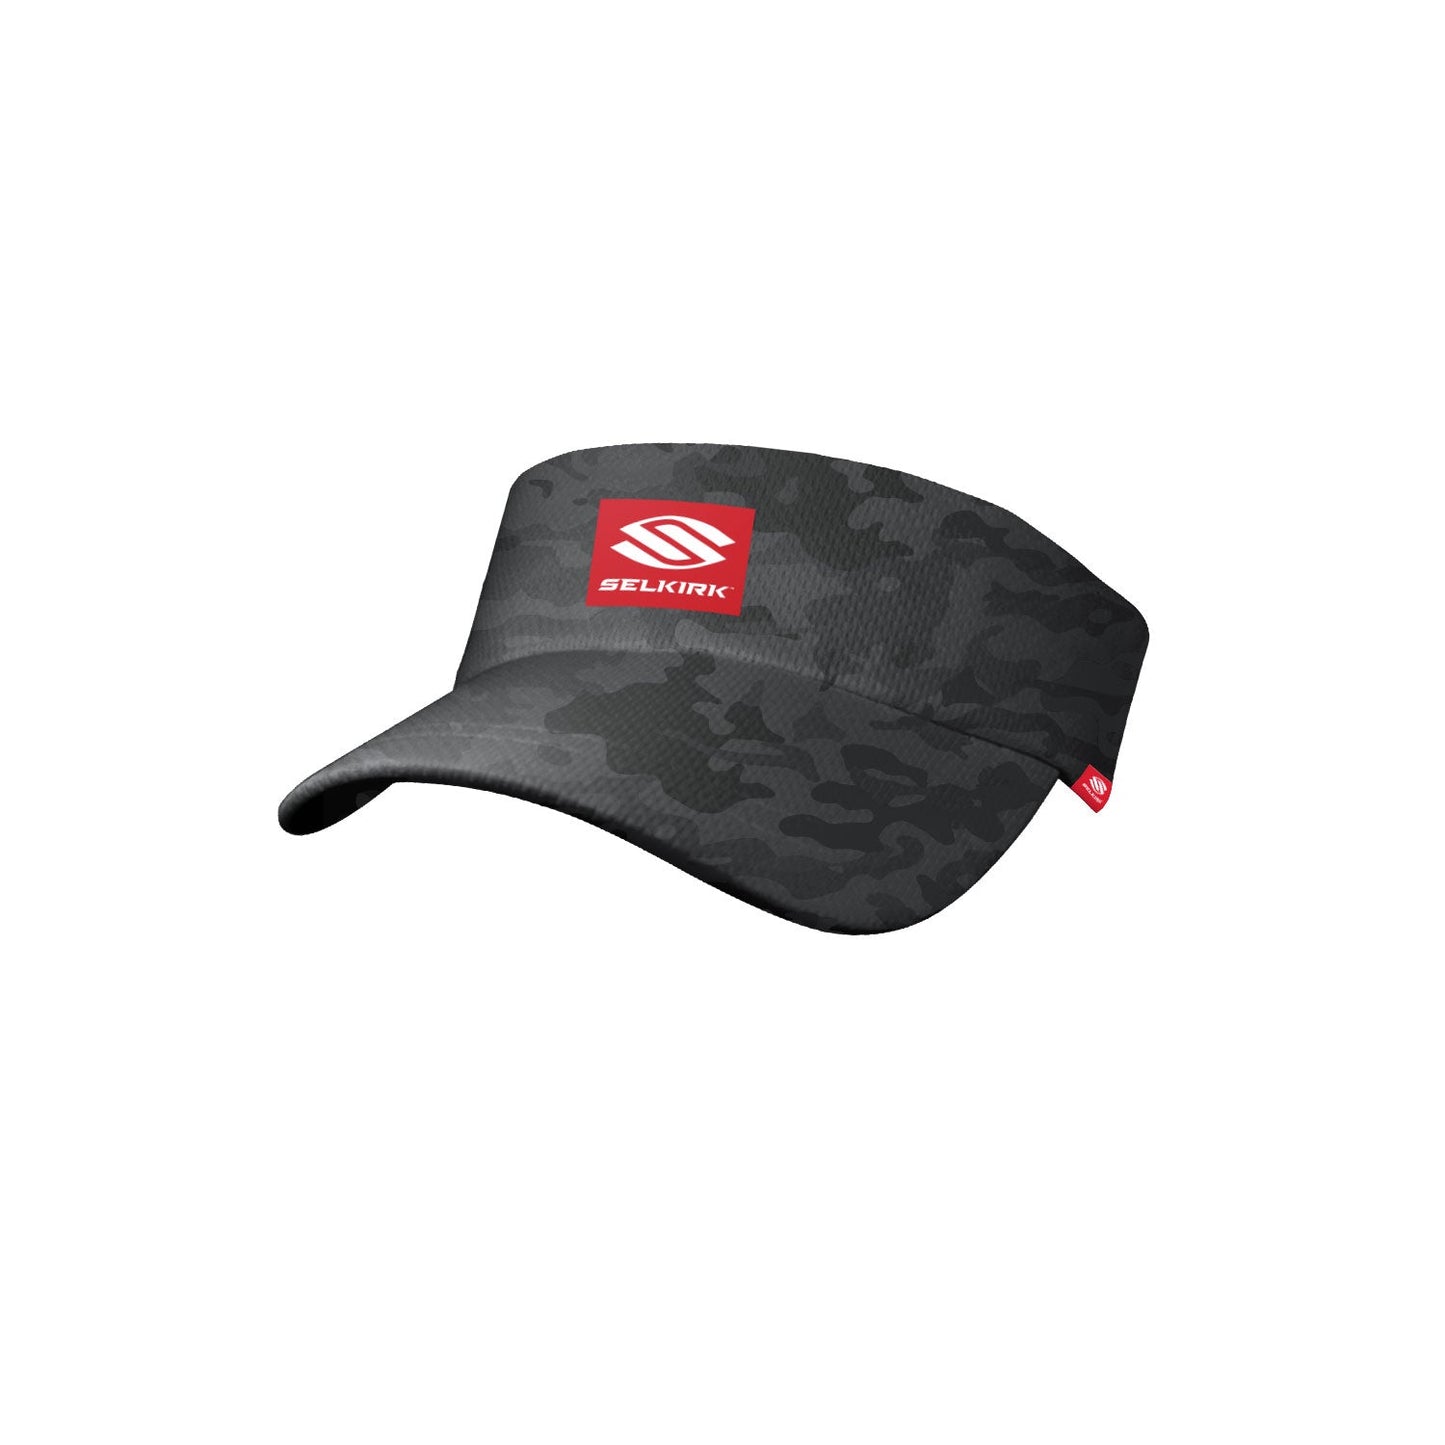 Selkirk Red Label Camo Unisex Stretch Performance Visor by Selkirk Sport